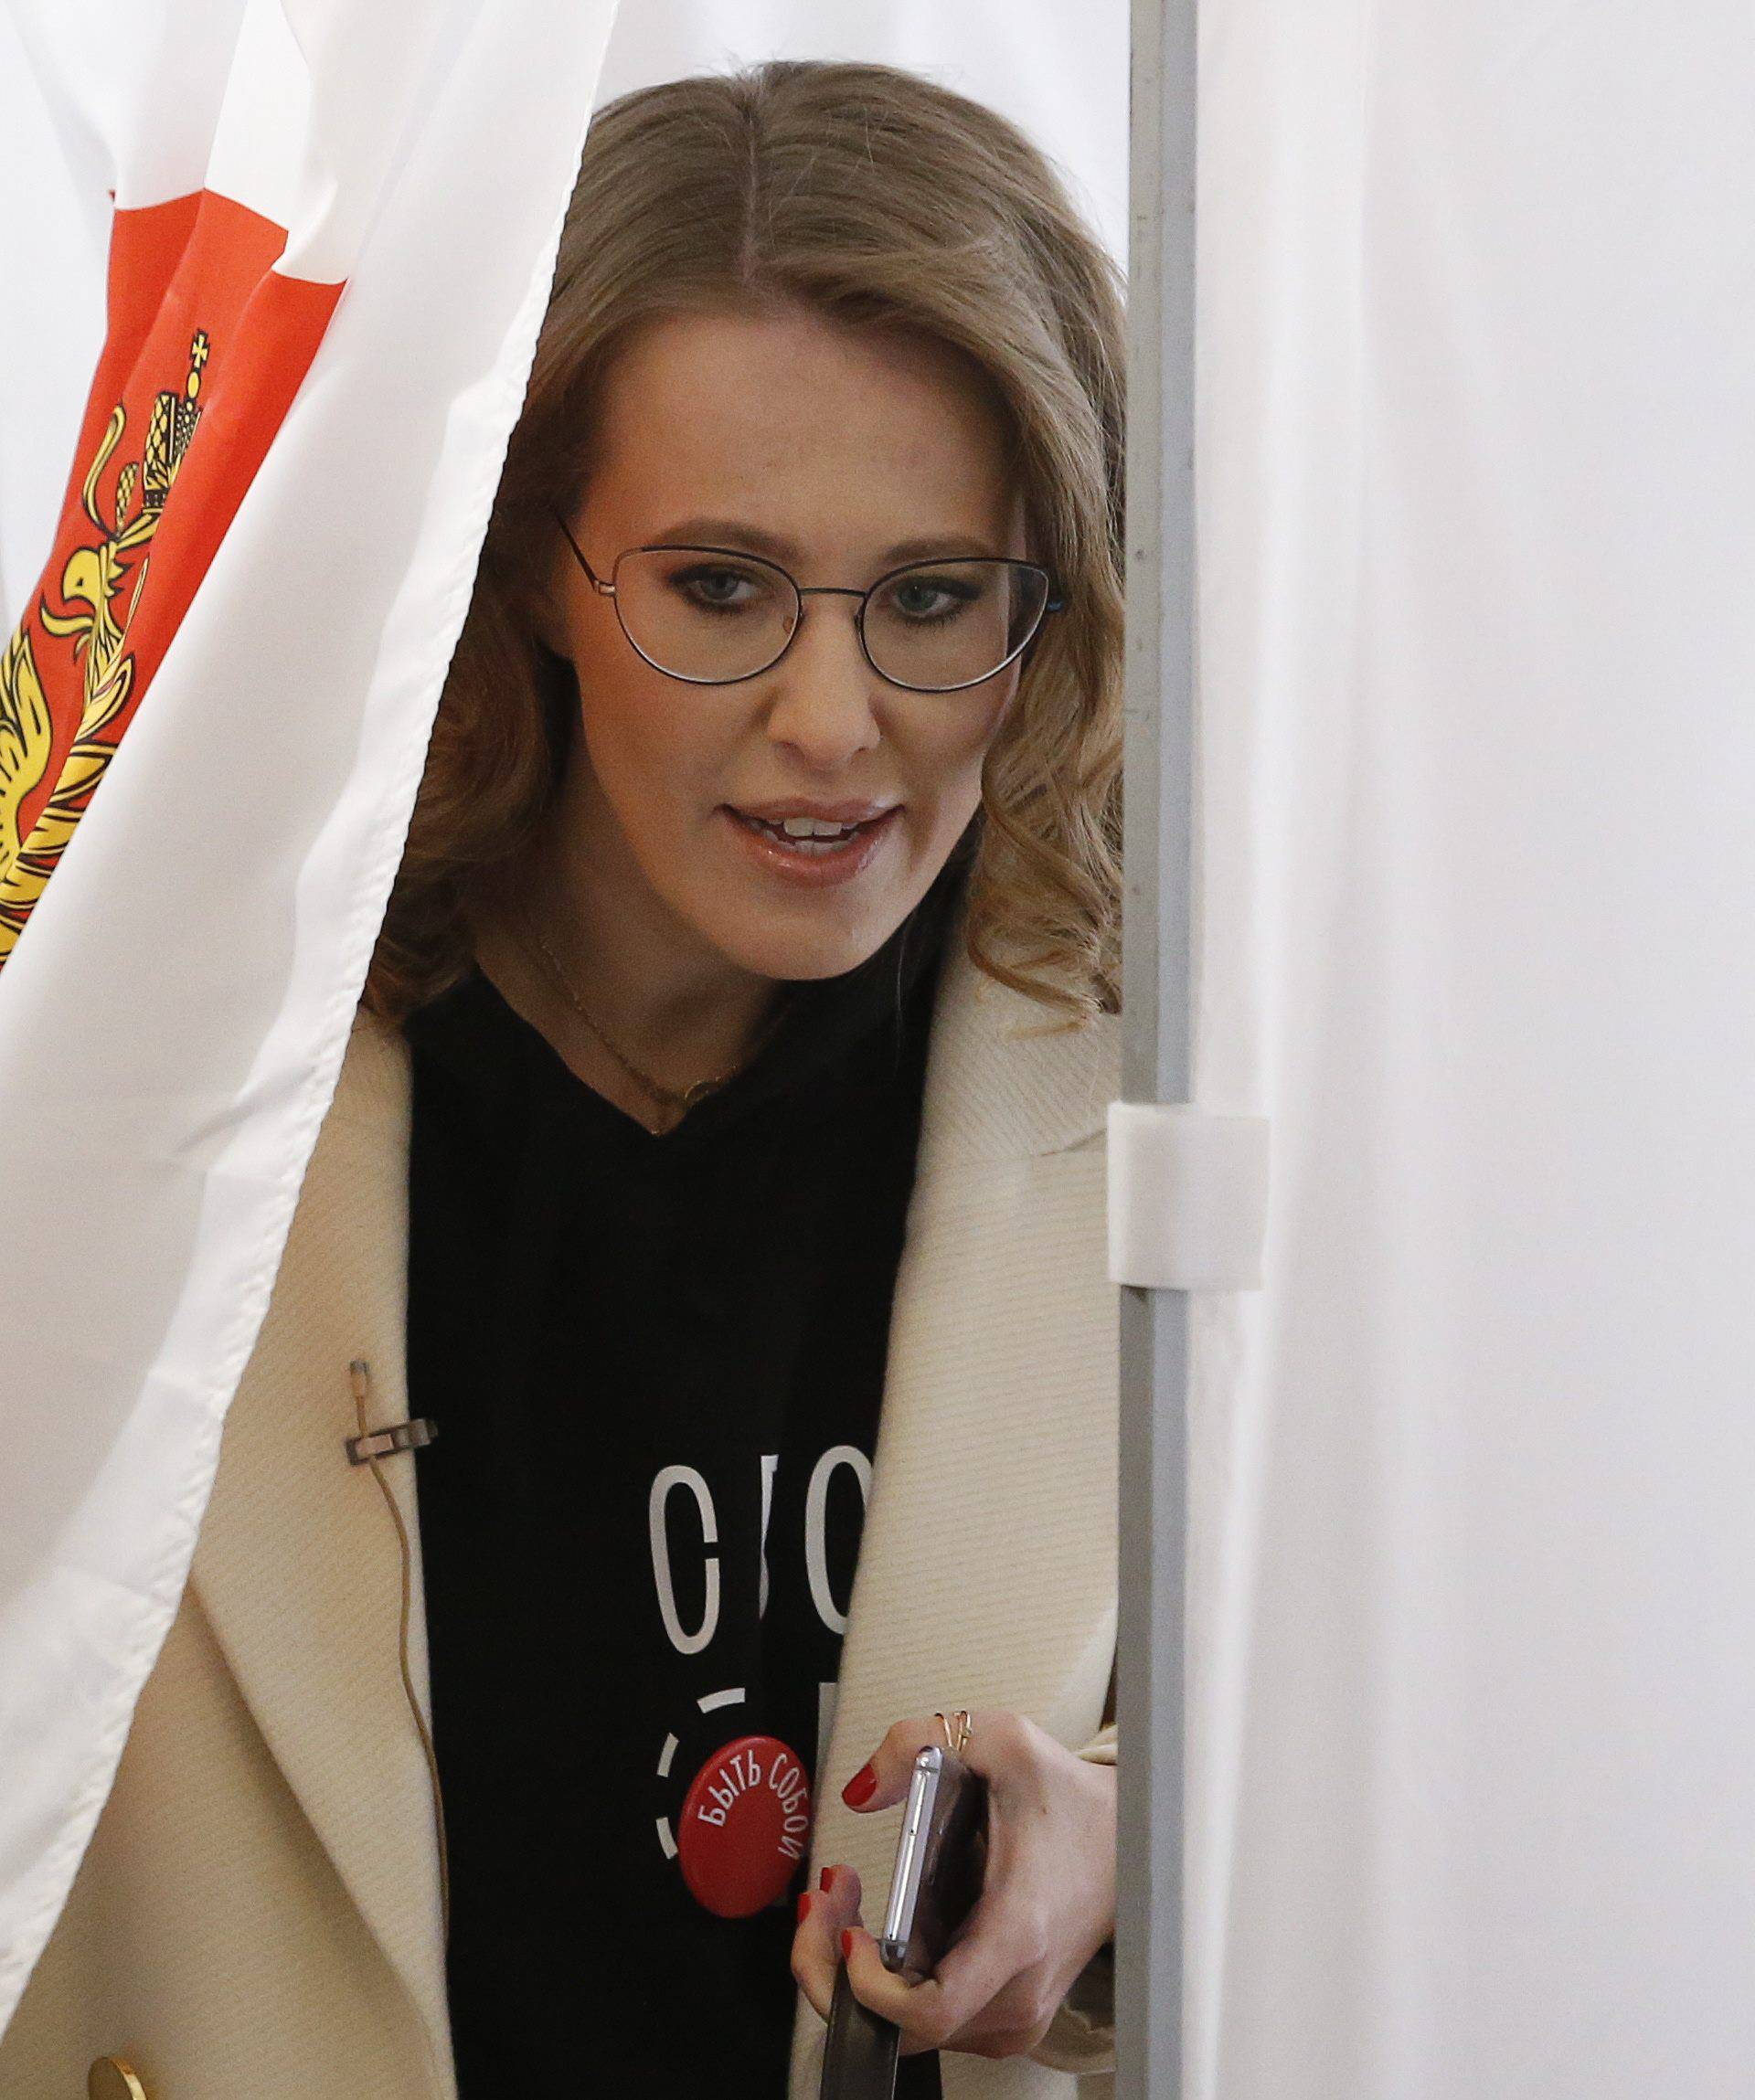 Presidential candidate Sobchak visits a polling station during the presidential election in Moscow